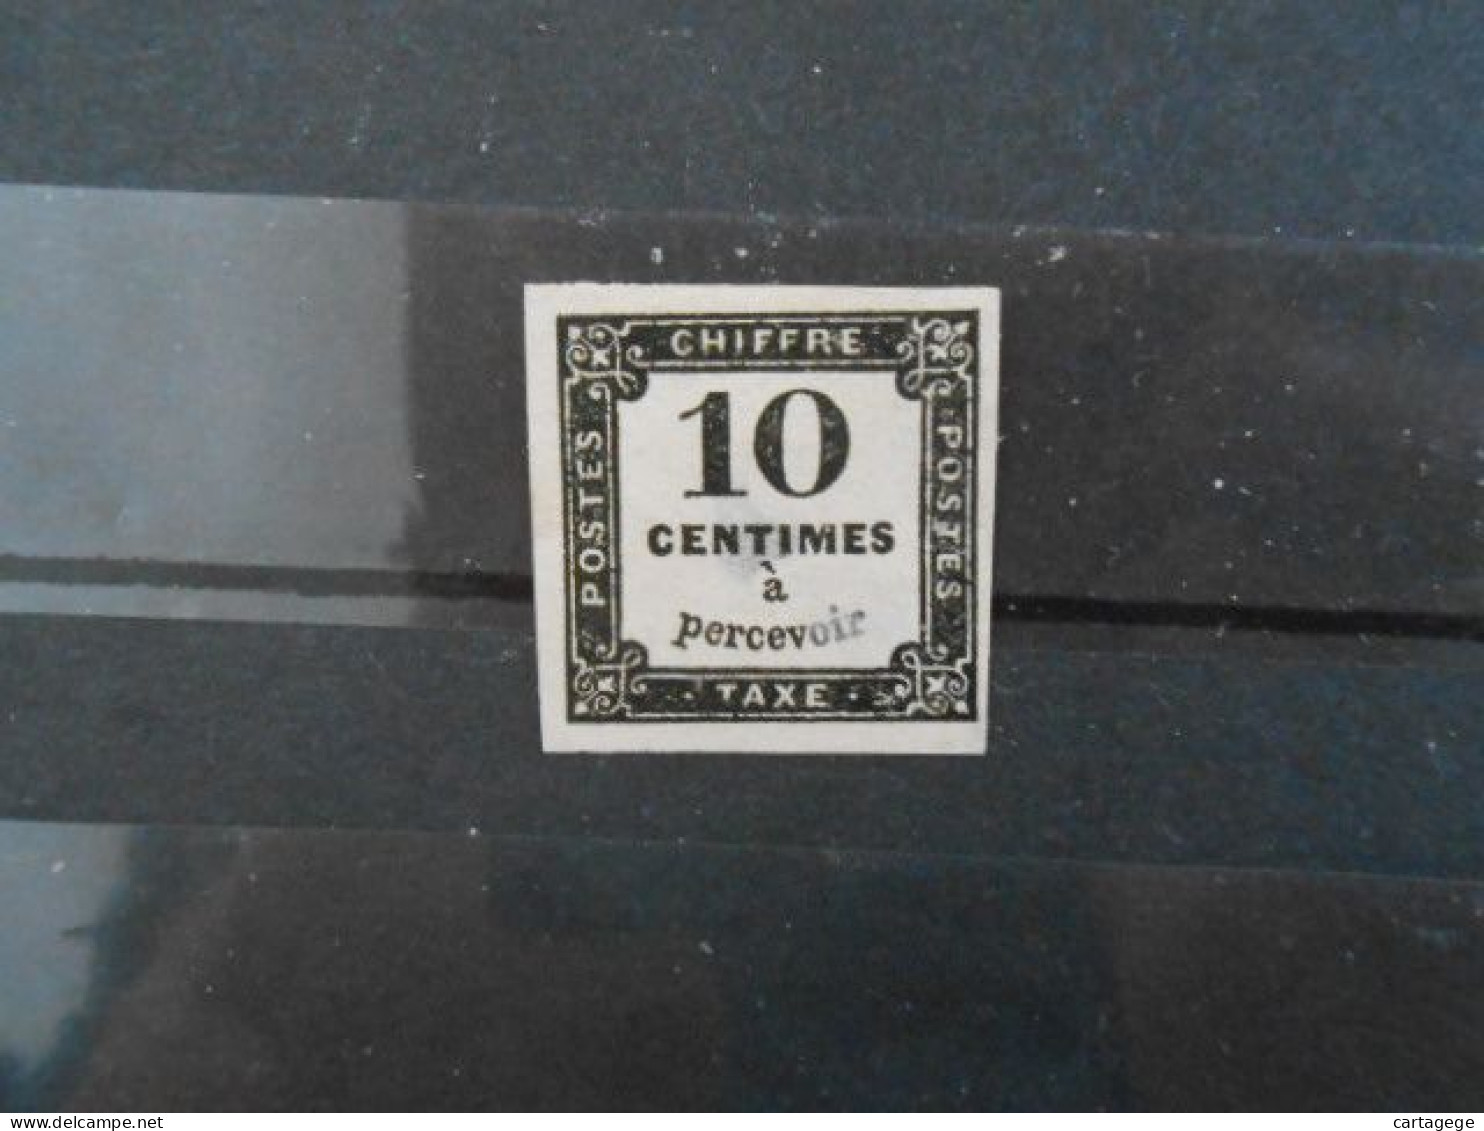 FRANCE YT TX 2 TYPOGRAPHIE 10c. - 1859-1959 Mint/hinged